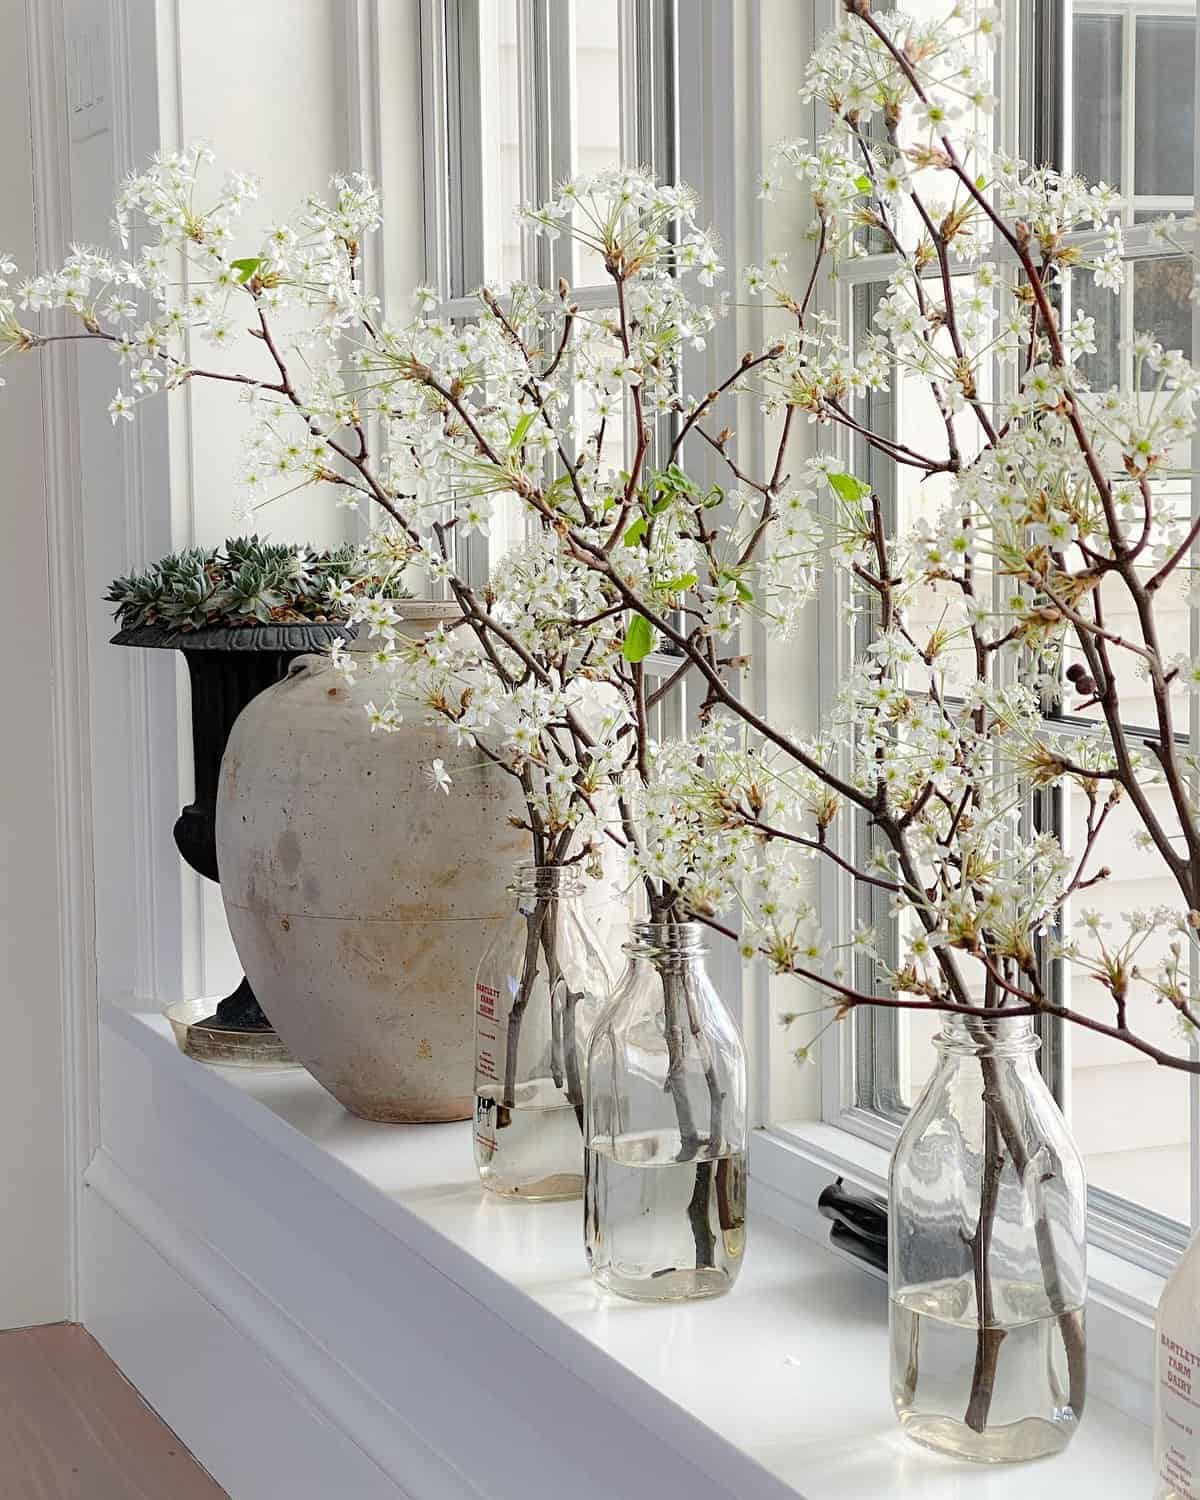 A window sill with several vases with flowers in them. Flowering Pear Branches